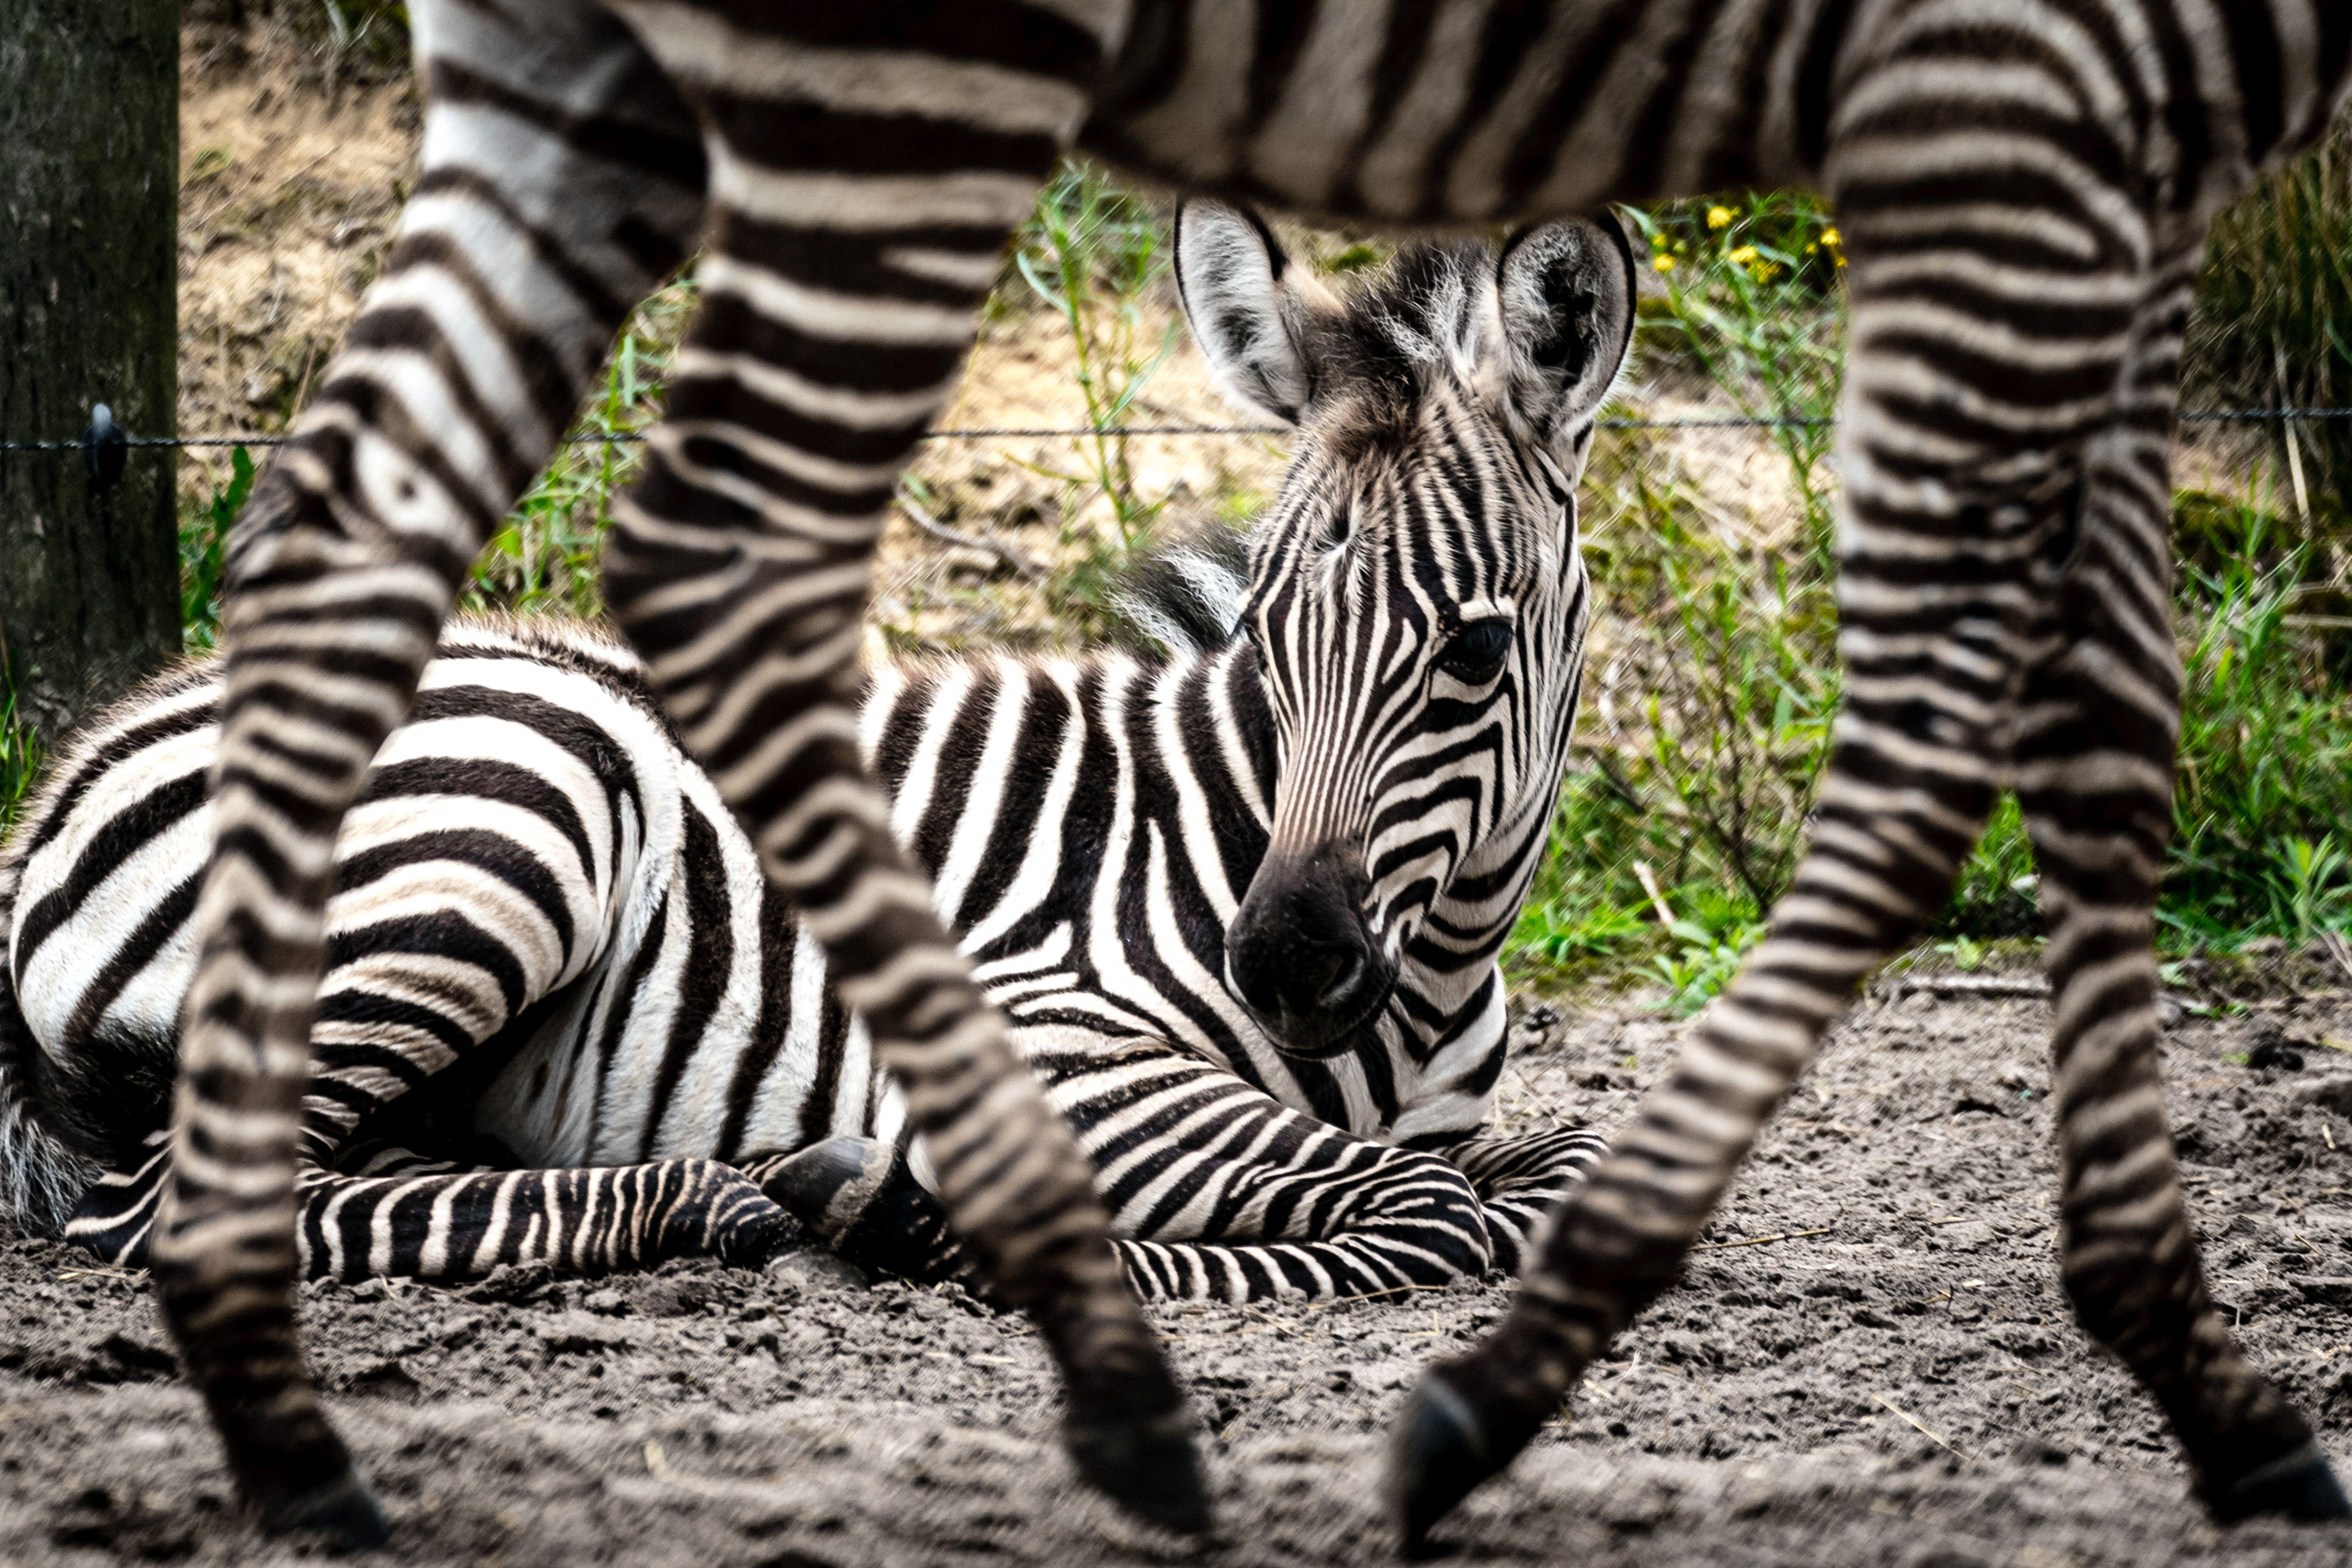 A zebra foal lying down at the Safari Resort Beekse Bergen in Hilvarenbeek, with the legs of another zebra walking in front of the foal. 